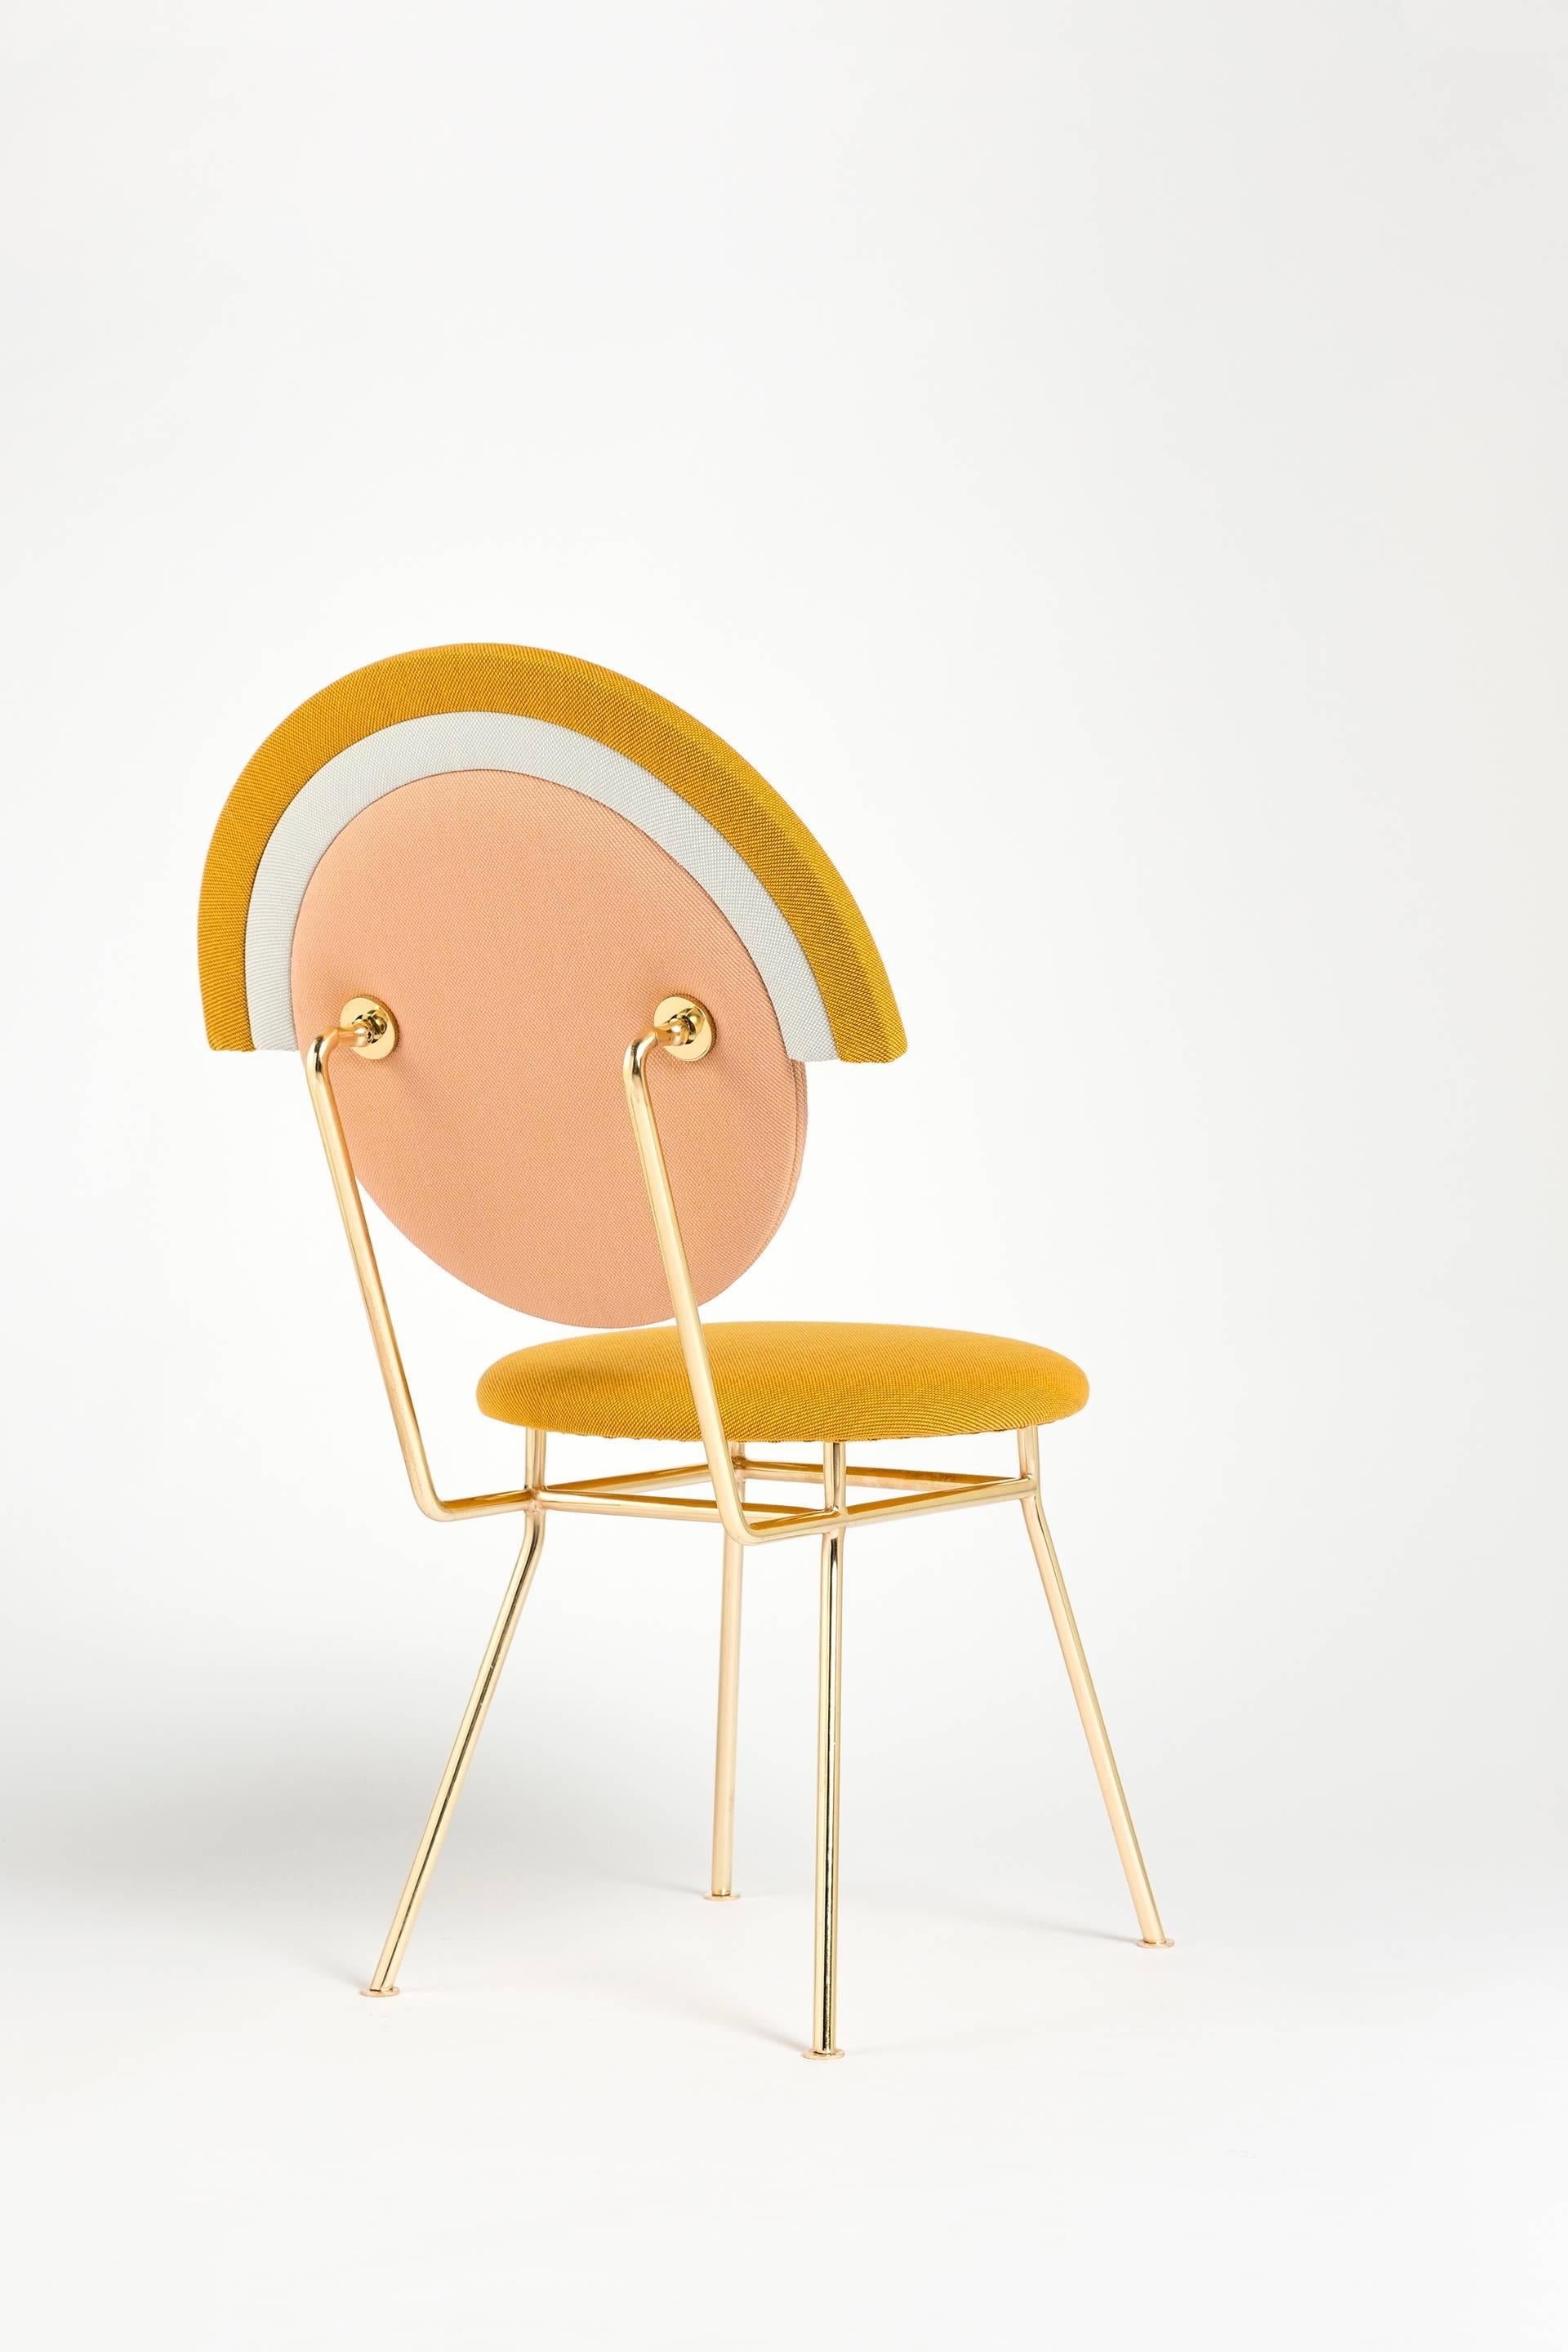 Turkish Iris Chair with Brass Finished Legs by Merve Kahraman For Sale